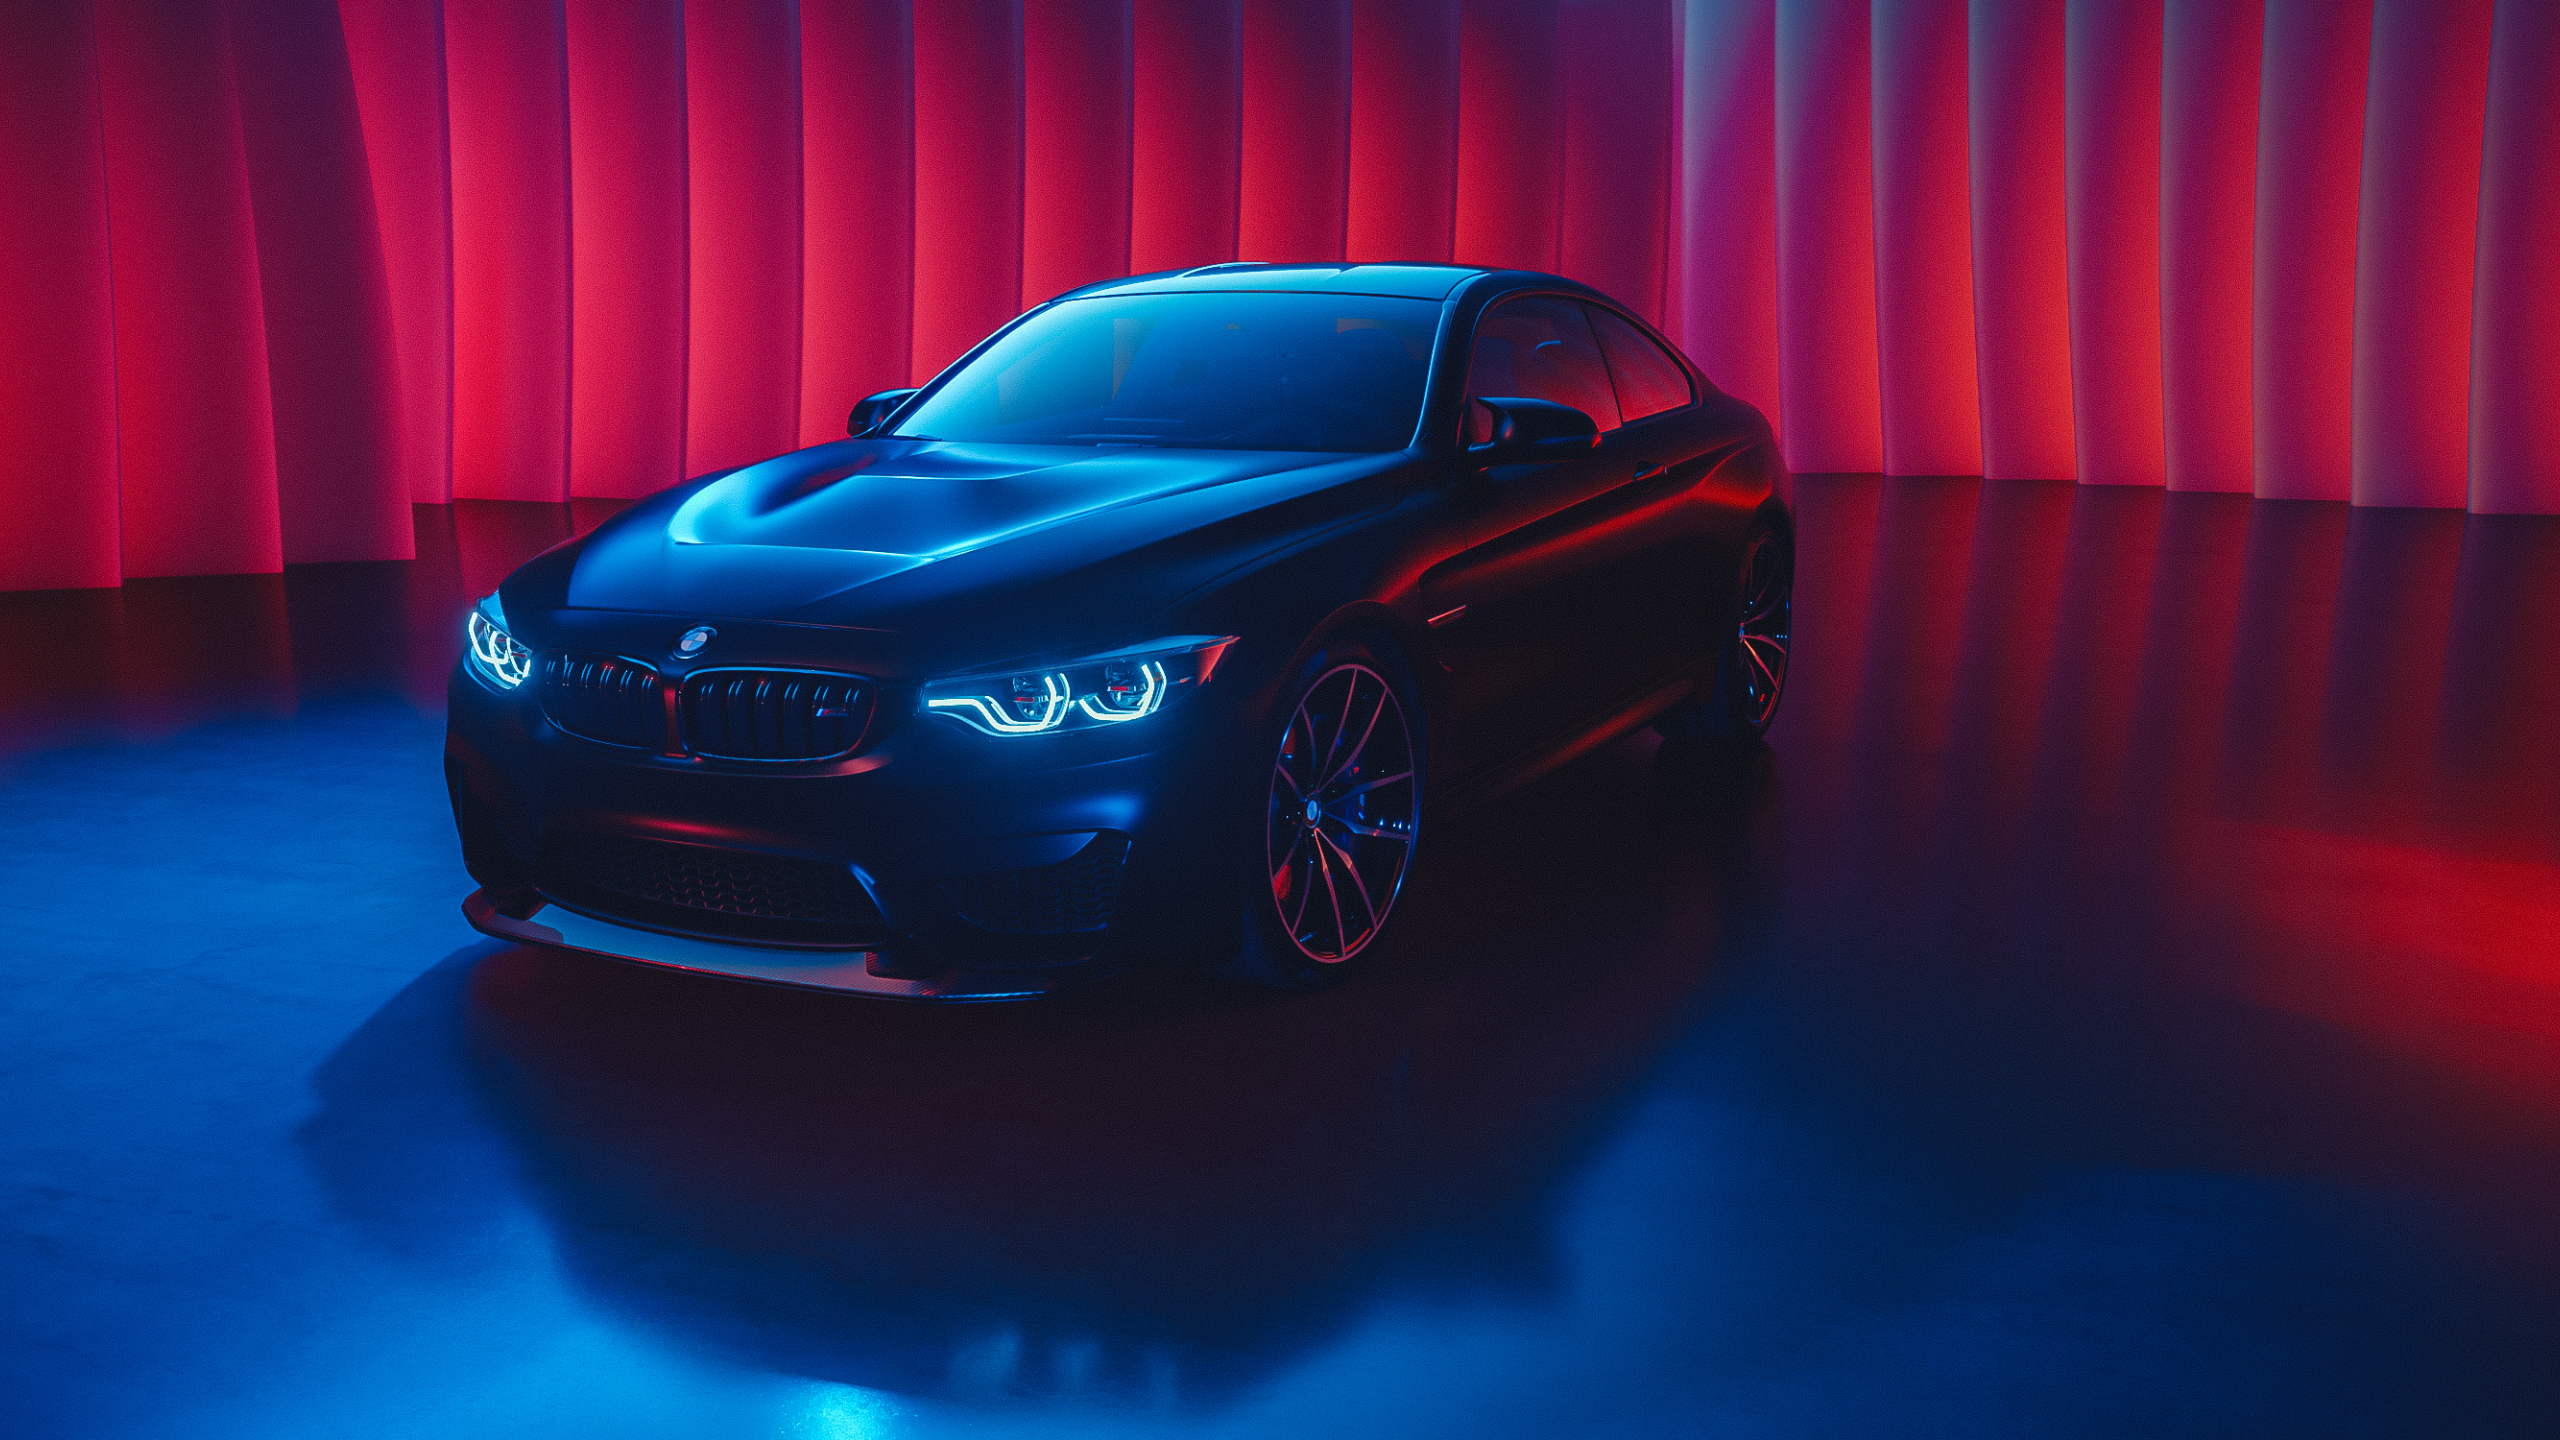 2560x1440 Bmw M4 Neon Color Art 1440p Resolution Wallpaper Hd Cars 4k Wallpapers Images Photos And Background Wallpapers Den